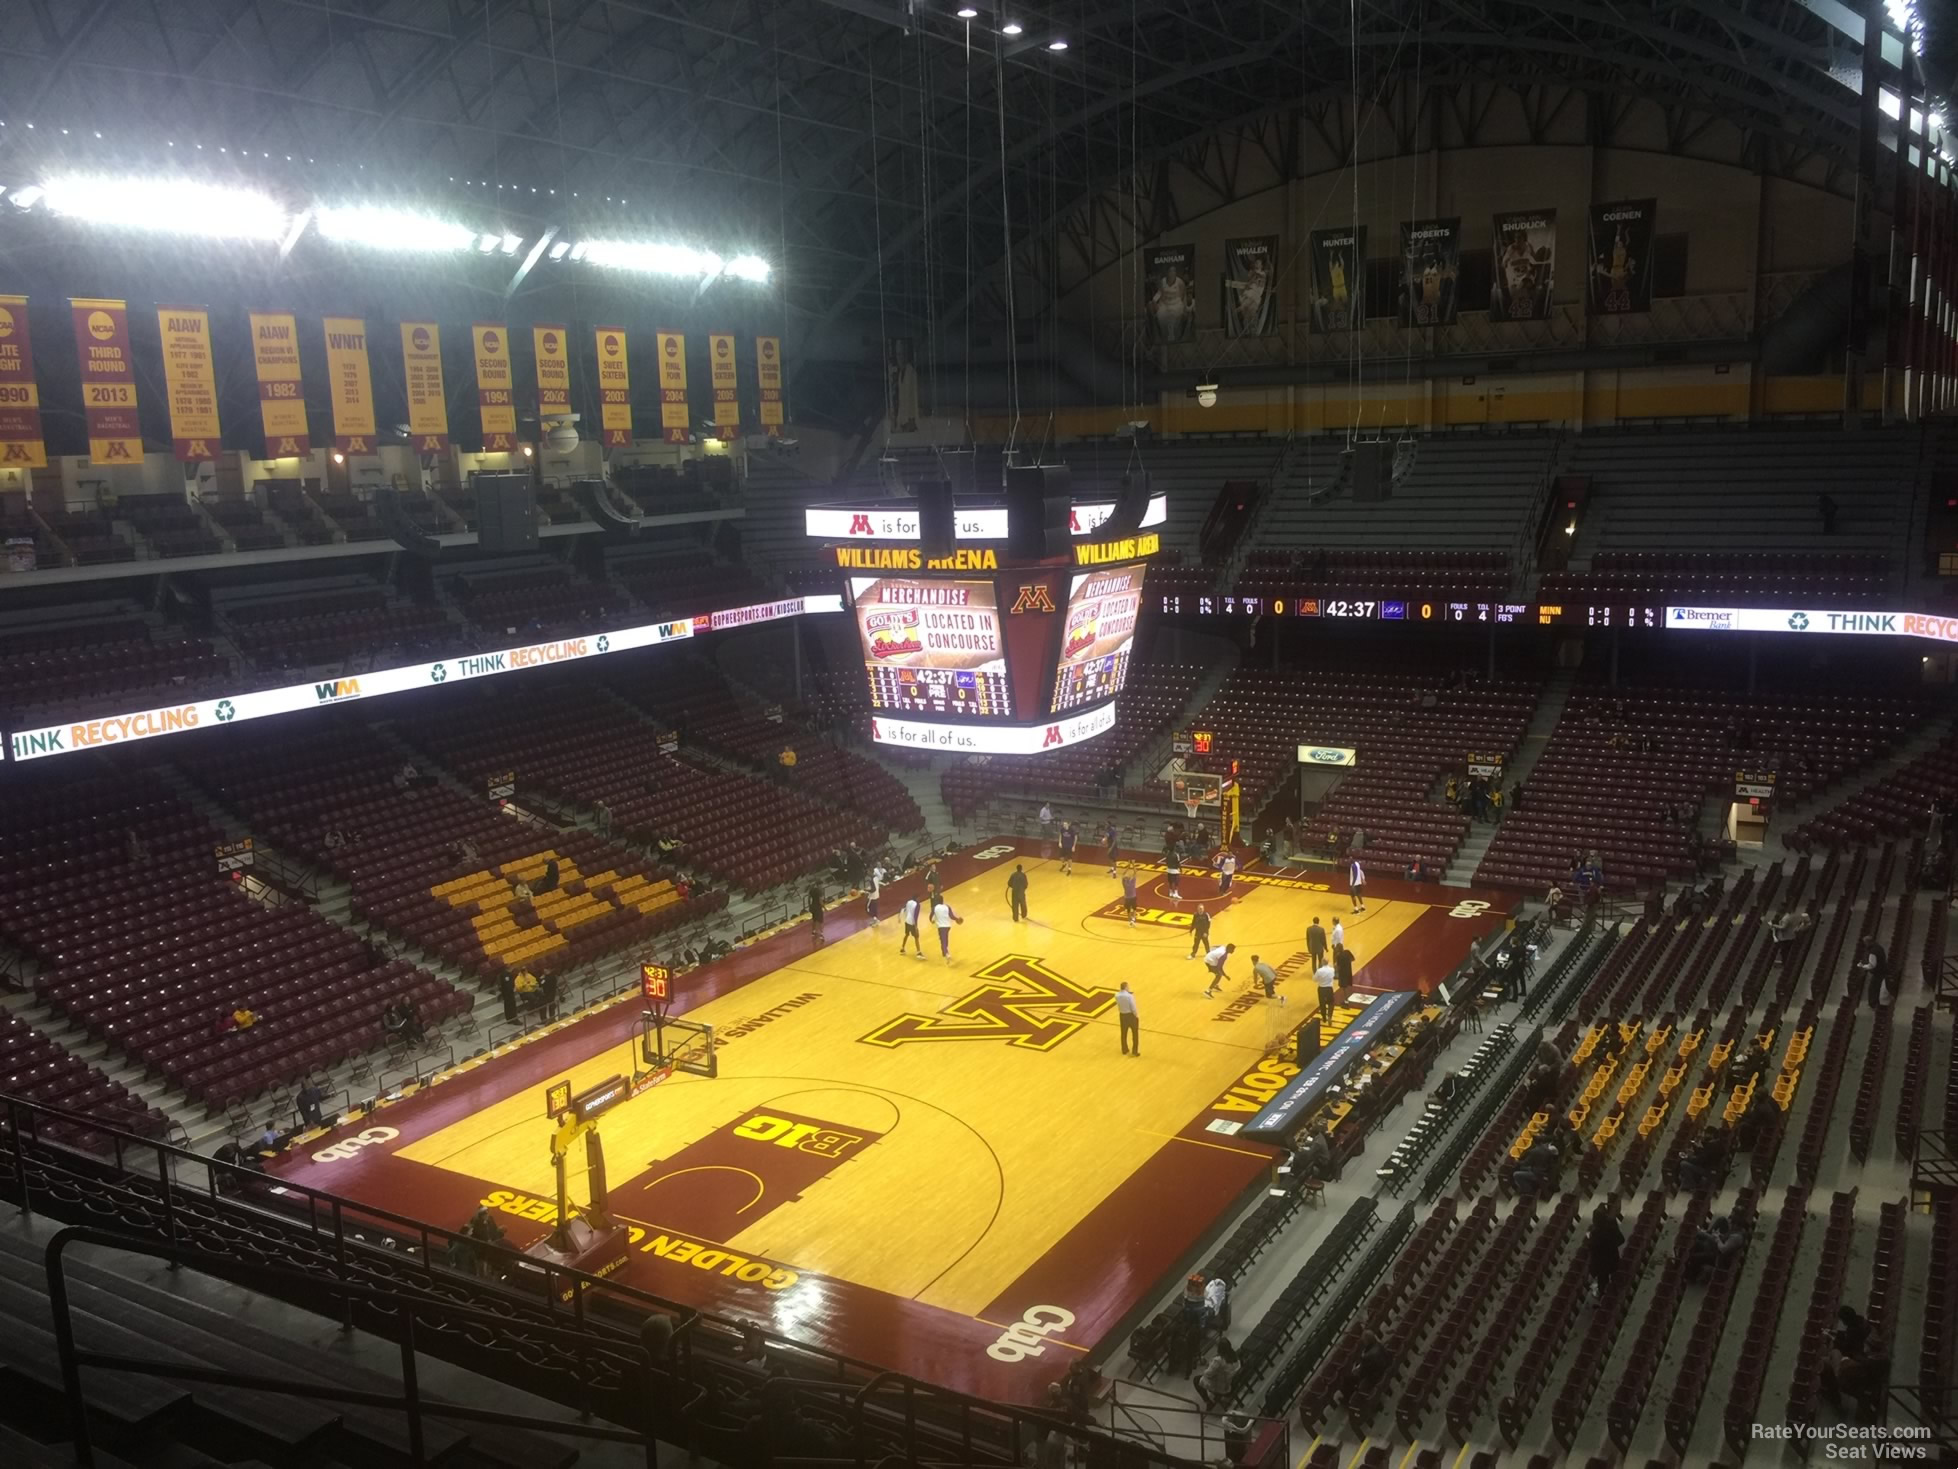 Williams Arena Seating Chart